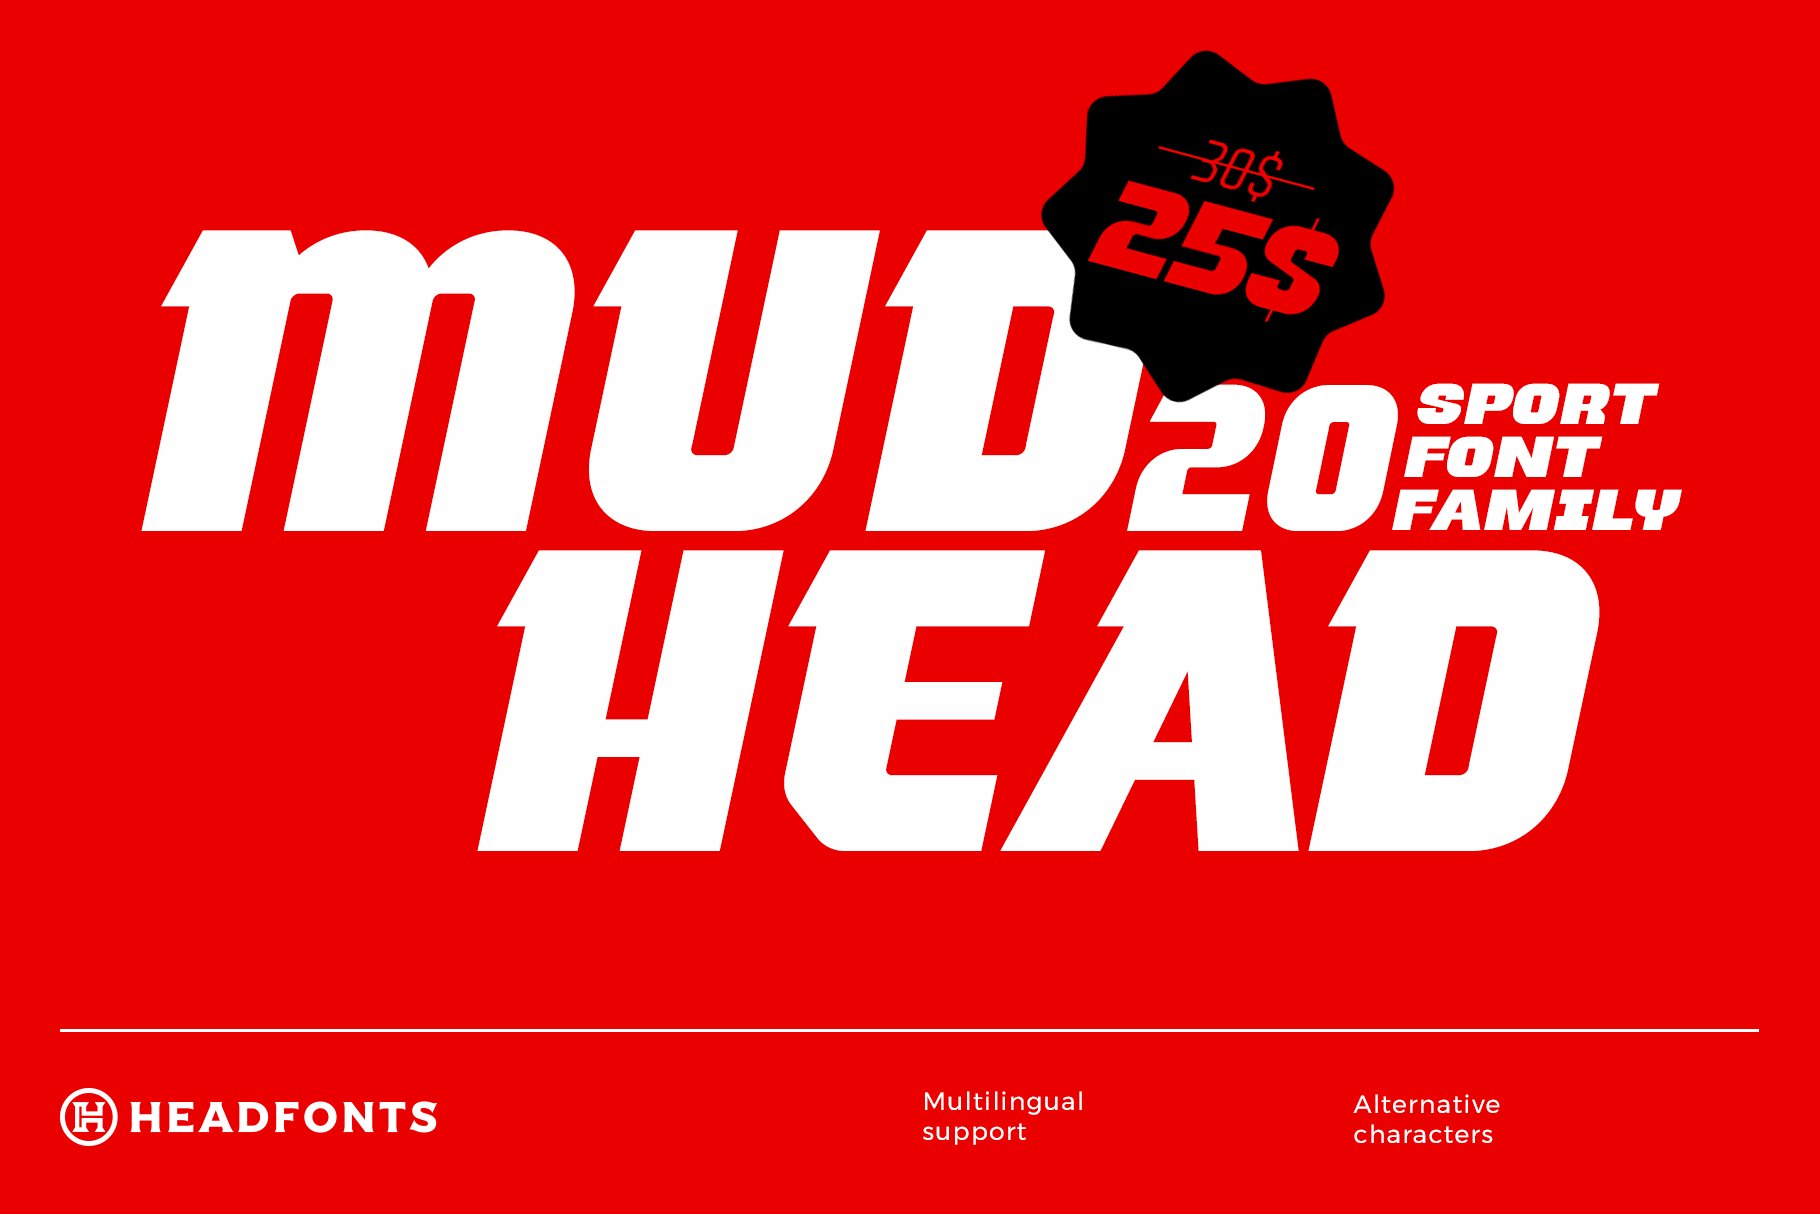 Mudhead Family | Sports Display Font cover image.